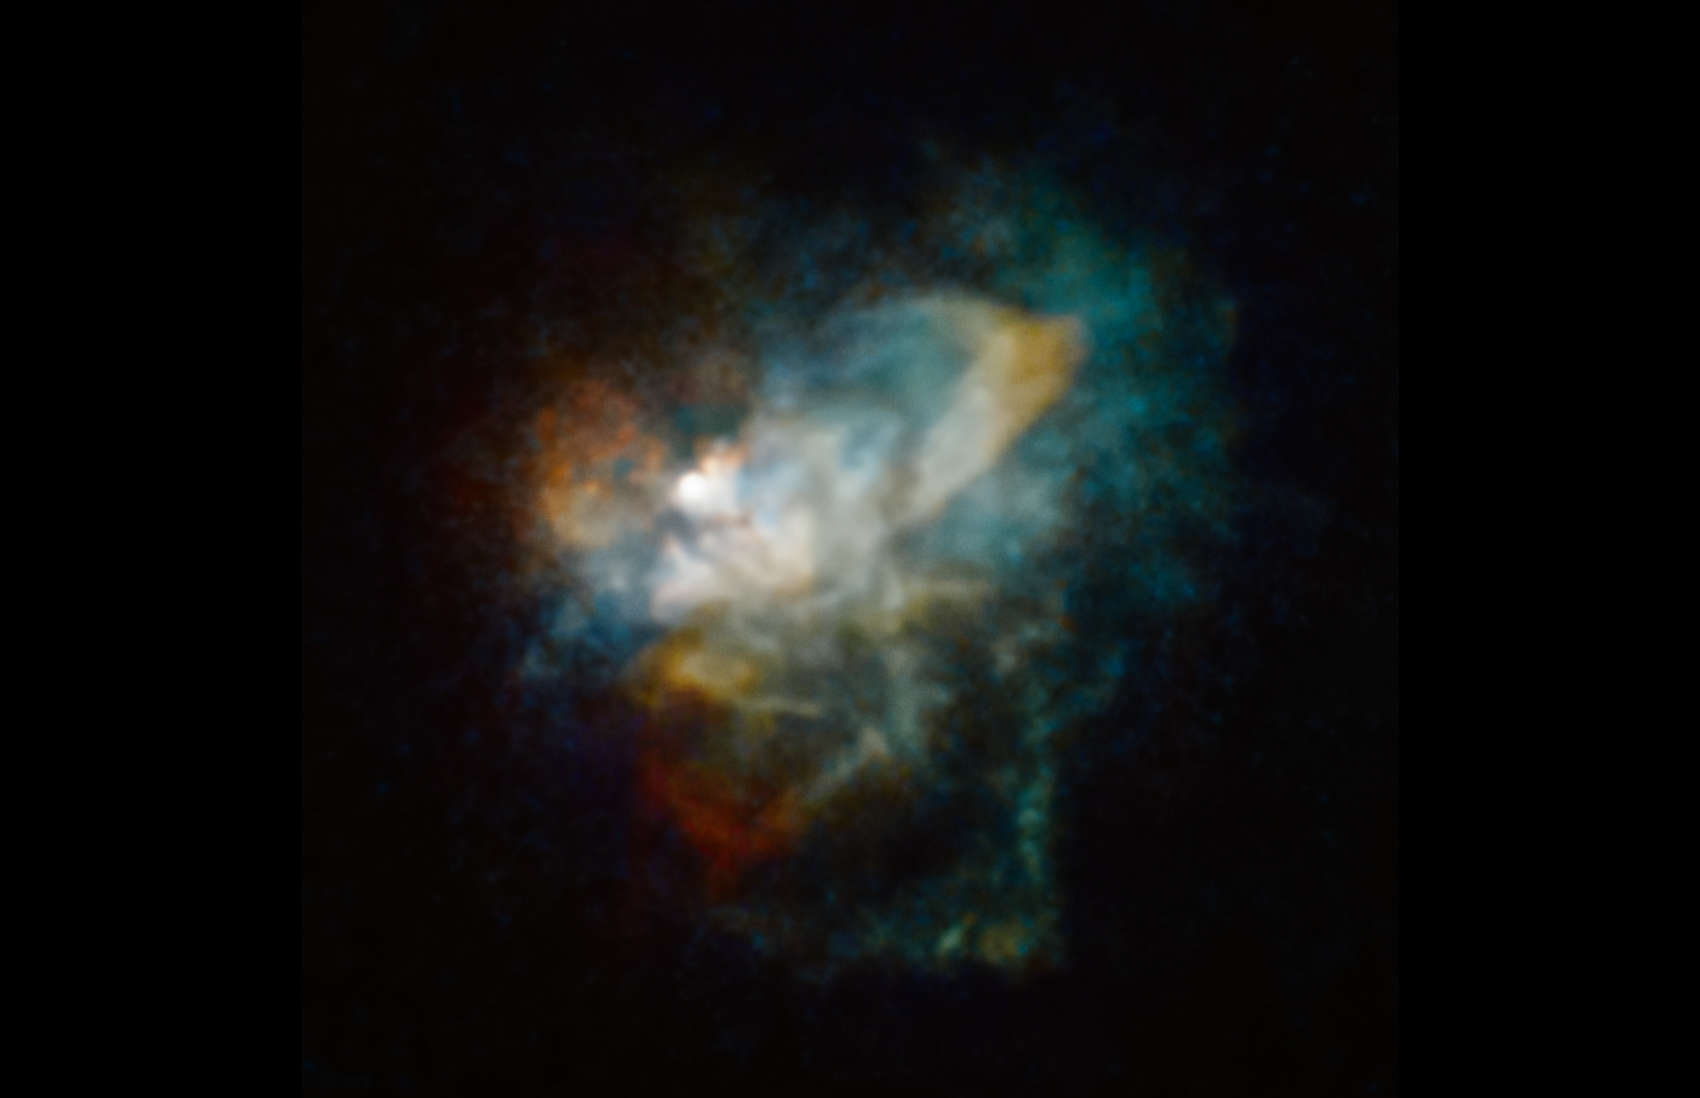 A Hubble image from 2005 of the red hypergiant VY Canis Majoris, showing the chaos of dust surrounding it. The star’s location is in the whitish blob left of center. Credit: NASA, ESA, and R. Humphreys (University of Minnesota)